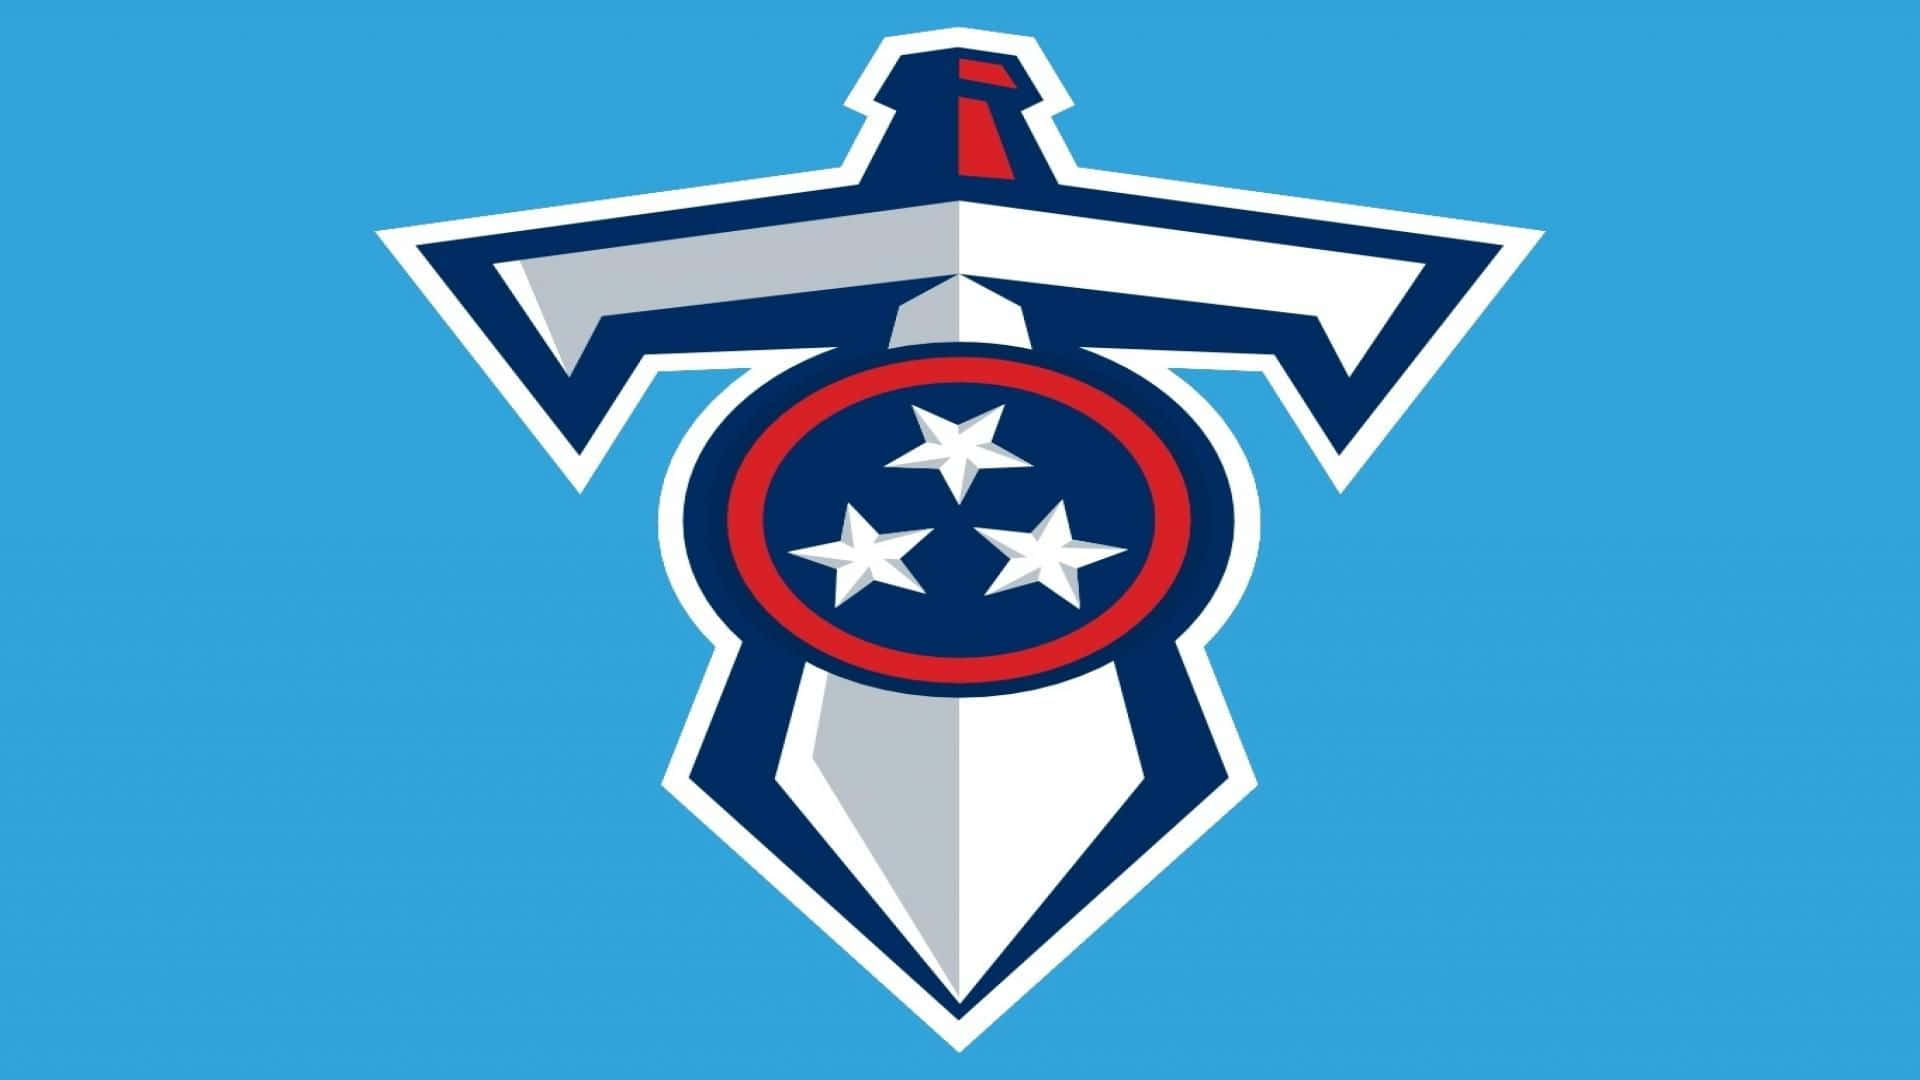 Get your Official Tennessee Titans Wallpaper For Free on Iphone Wallpaper